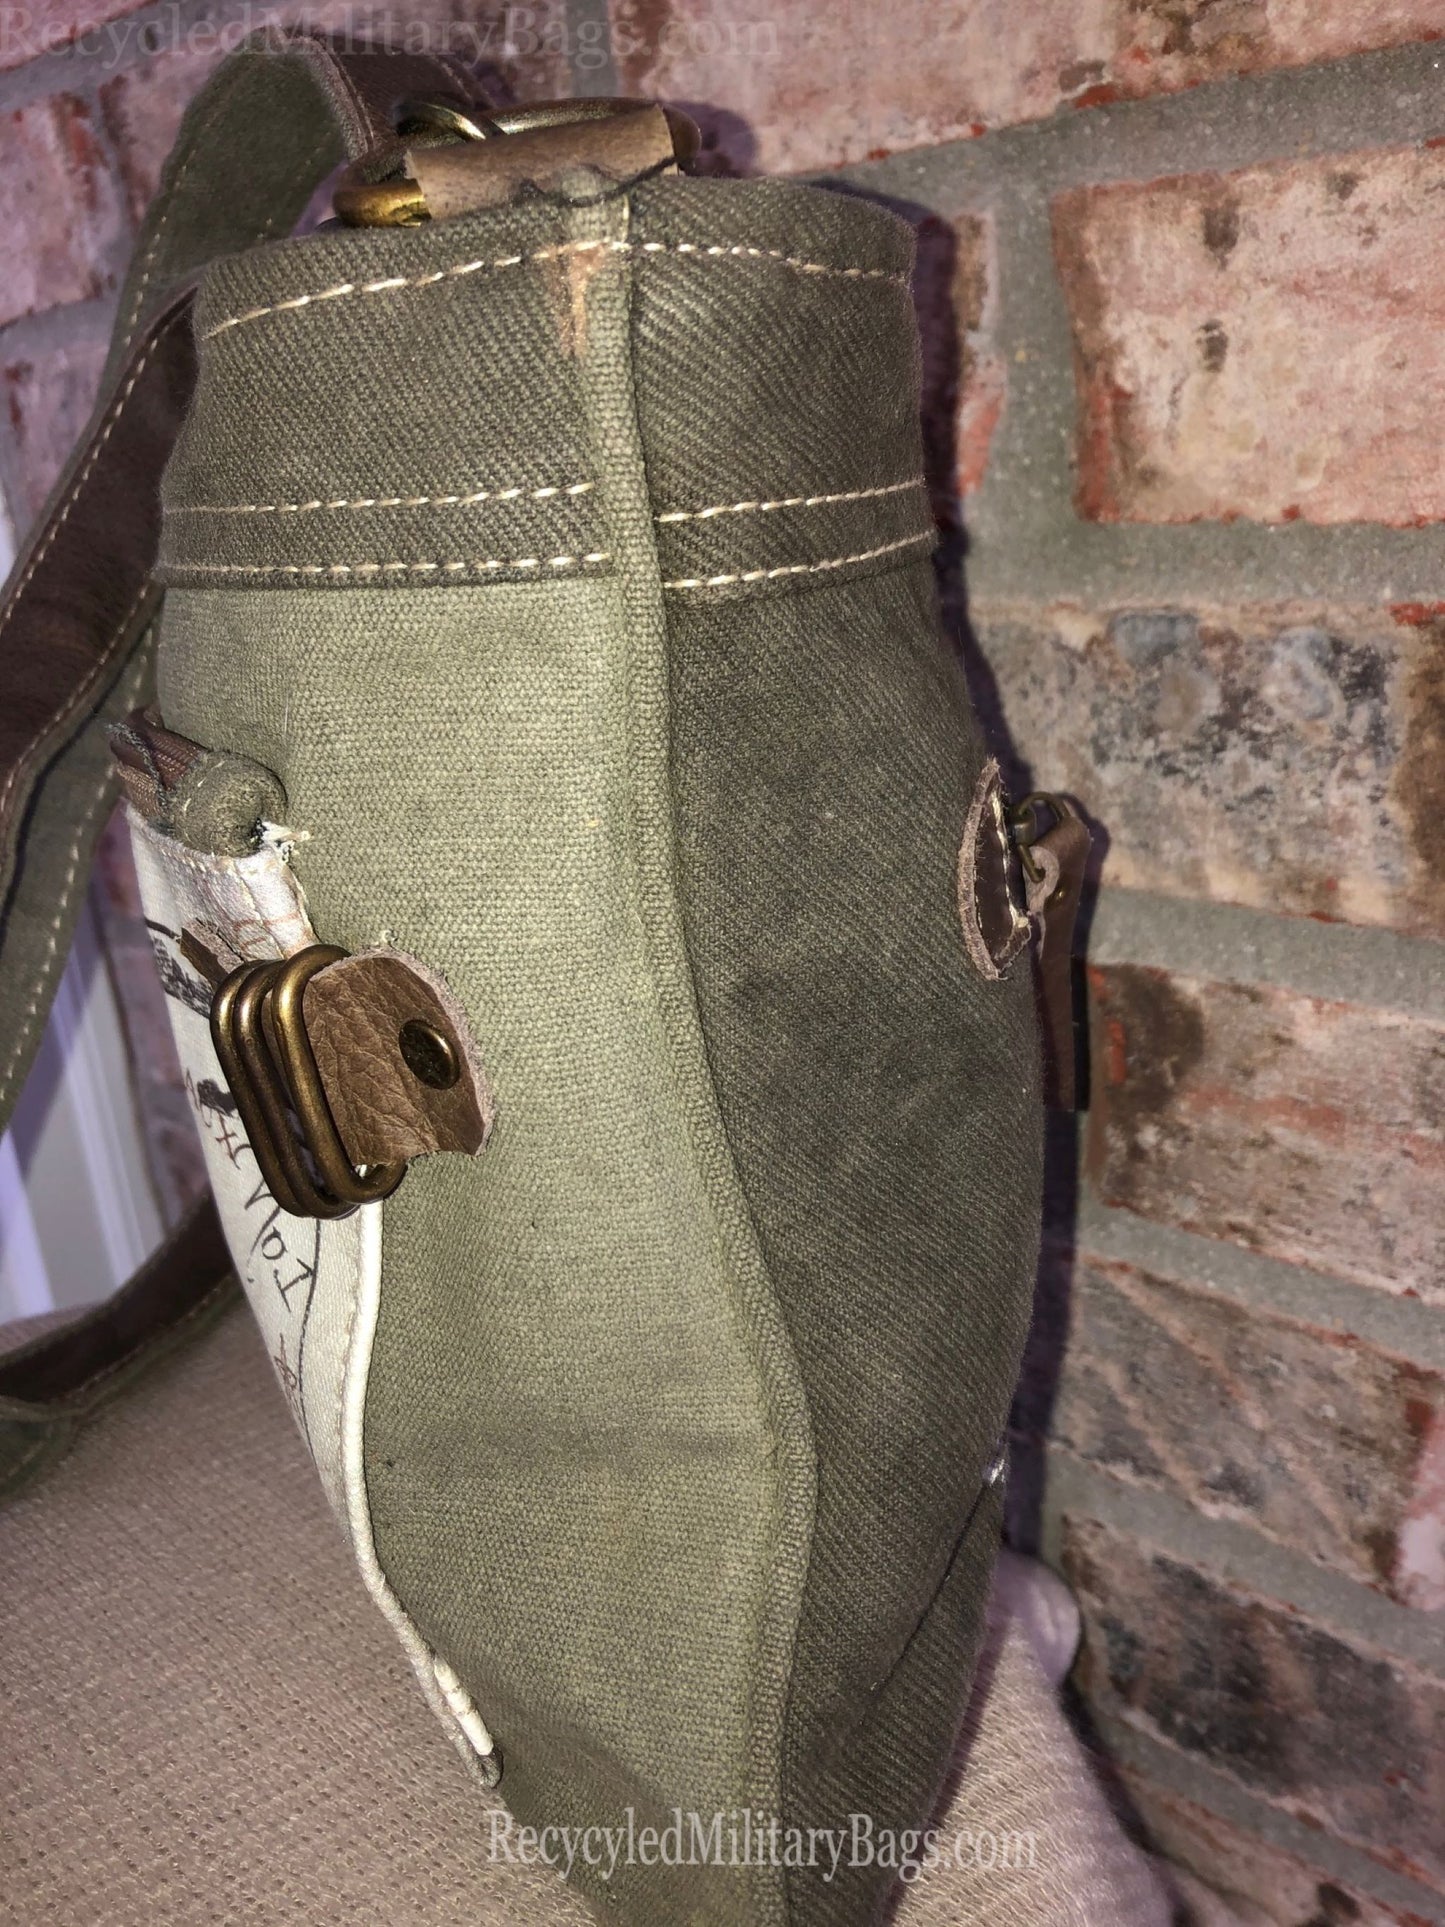 Chateau Sustainable Canvas Crossbody Shoulder Bag Purse ~ Wine Lovers Dream!